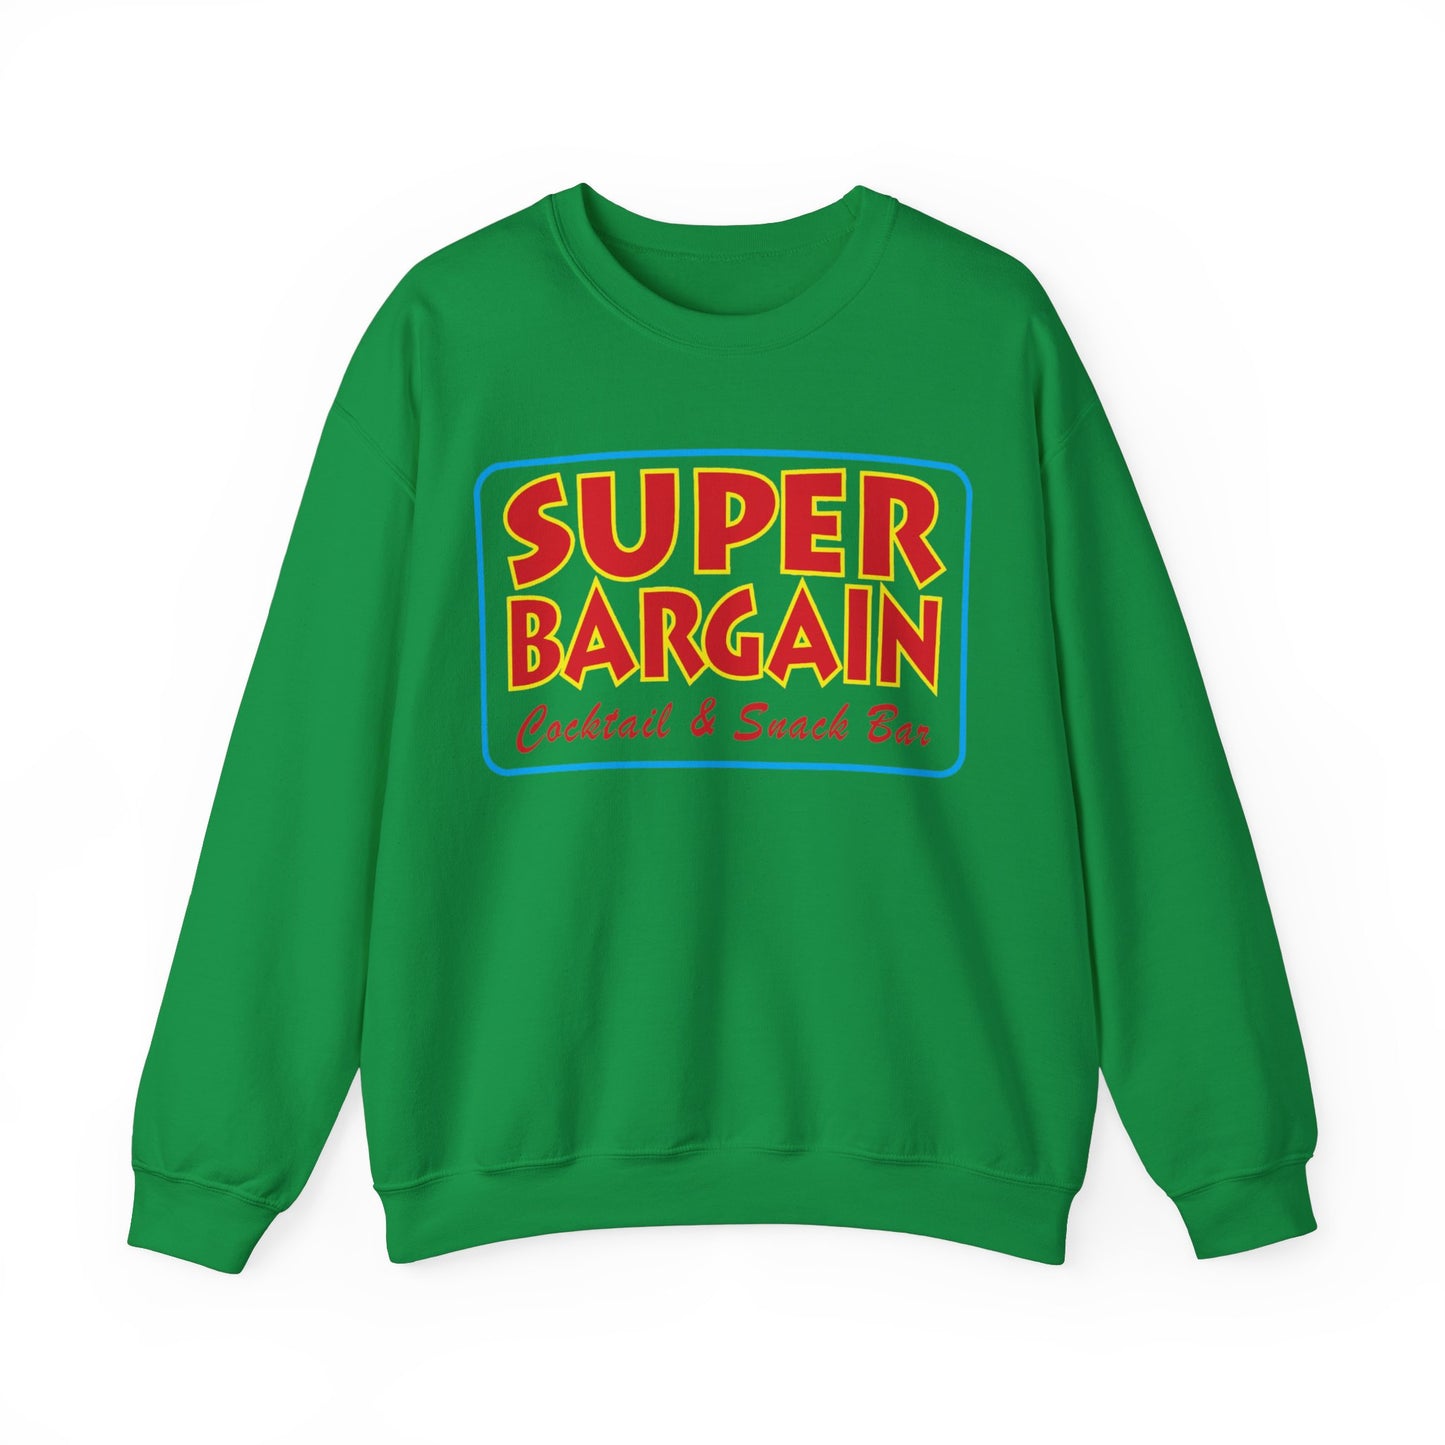 A green Unisex Heavy Blend™ Crewneck Signature Logo sweatshirt with the phrase "SUPER BARGAIN Toronto Orchard & Seeds Inc." in yellow and red text on the front by Printify.